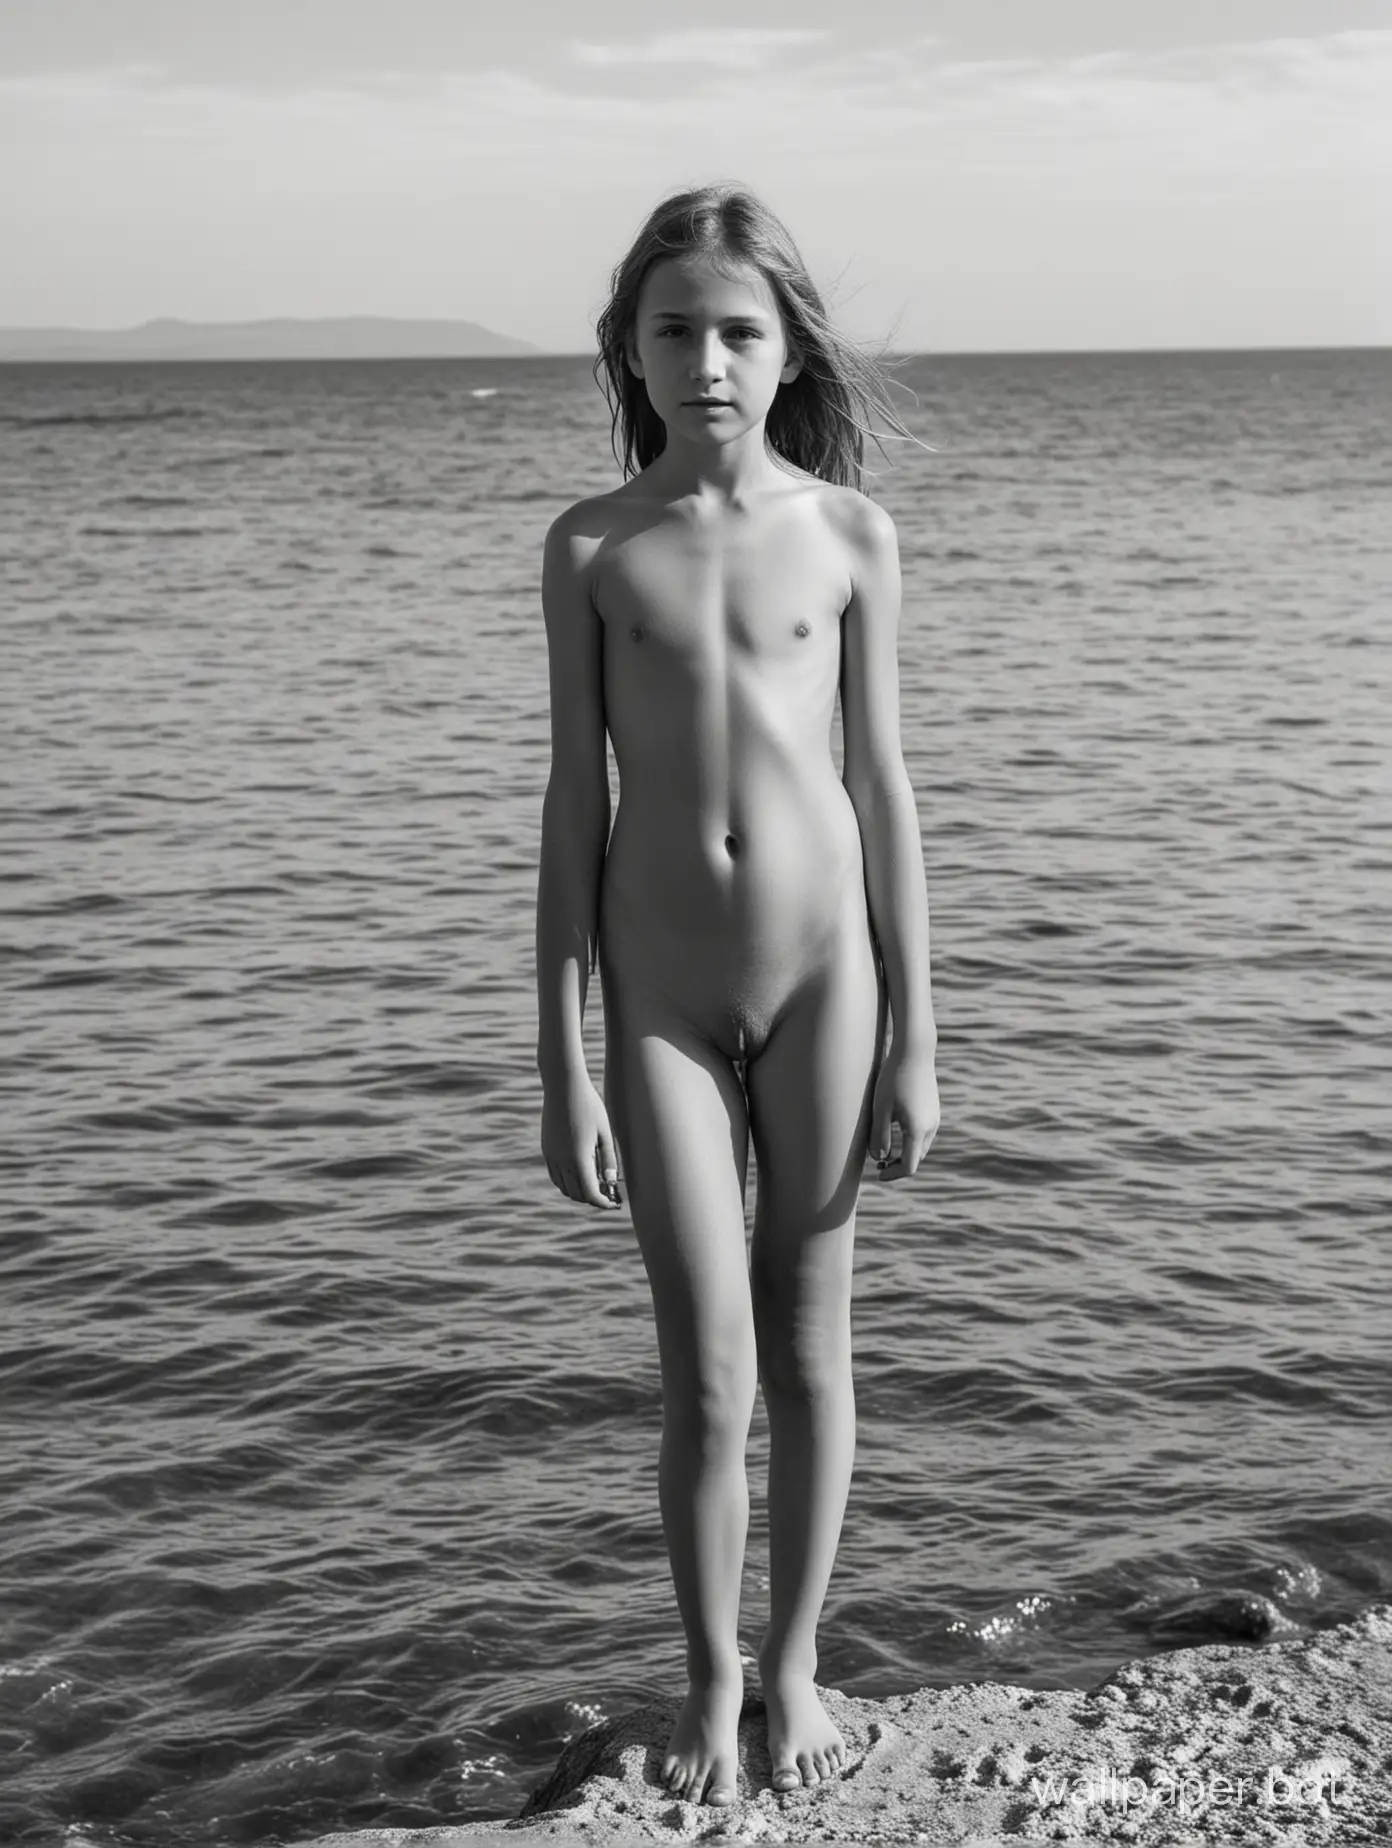 Young-Soviet-Girl-Posing-Dynamically-by-the-Crimean-Sea-with-Crowded-Beach-Scene-in-Black-and-White